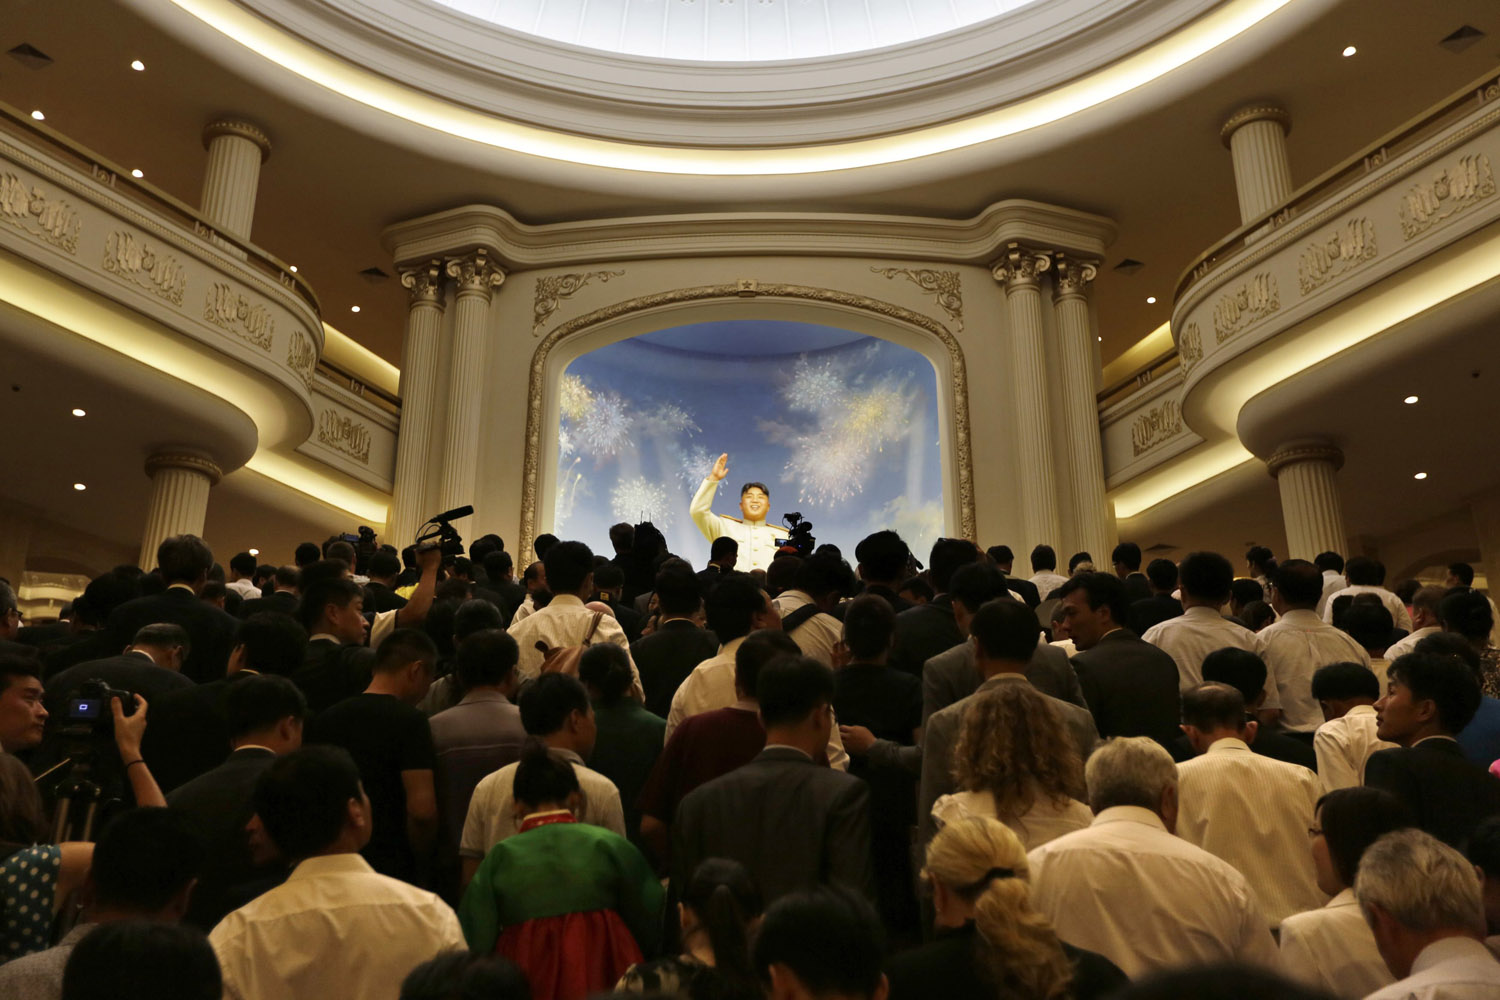 July 27, 2013. North Koreans and the media arrive to visit in front of a figure of North Korea founder Kim Il-sung after the opening ceremony of the Victorious Fatherland Liberation War Museum, in Pyongyang as part of celebrations of the 60th anniversary of the signing of a truce in the 1950-1953 Korean War.